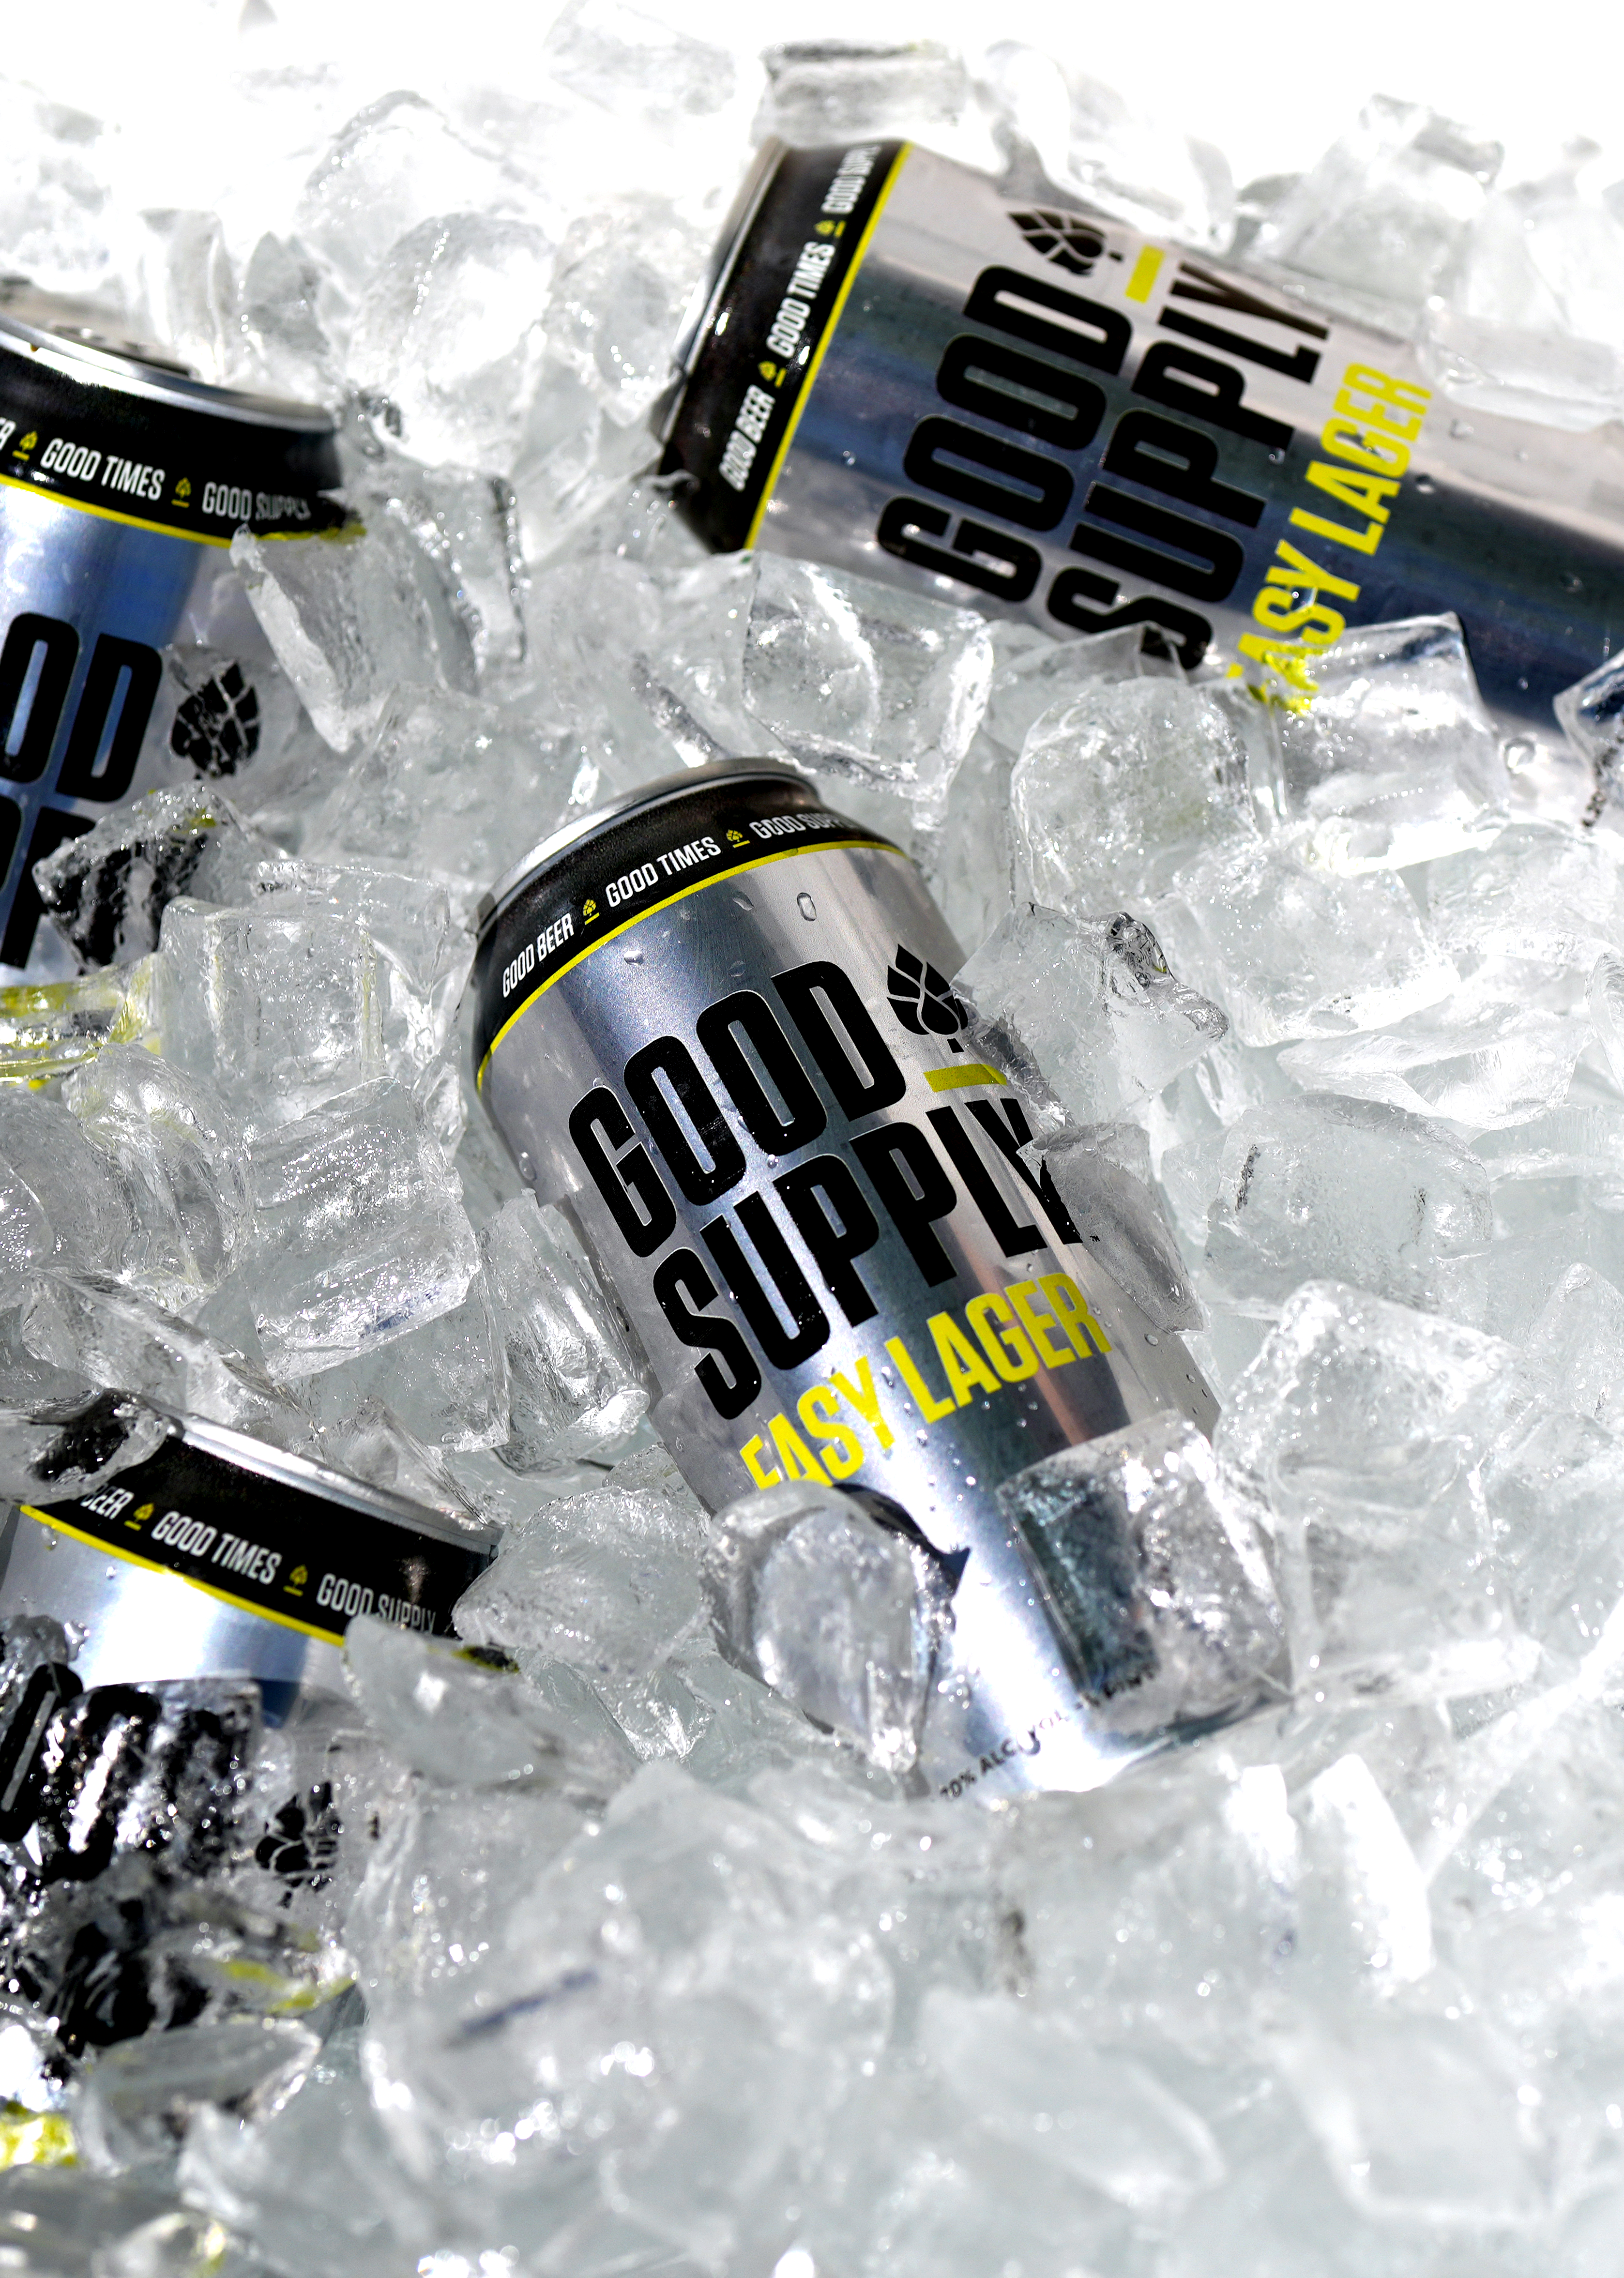 Good Supply’s clean taste and premium ingredients are an ode to simplicity, yet not compromising on the things that matter, like selecting the finest Pilsner malts and investing time and thought into perfecting the recipe.